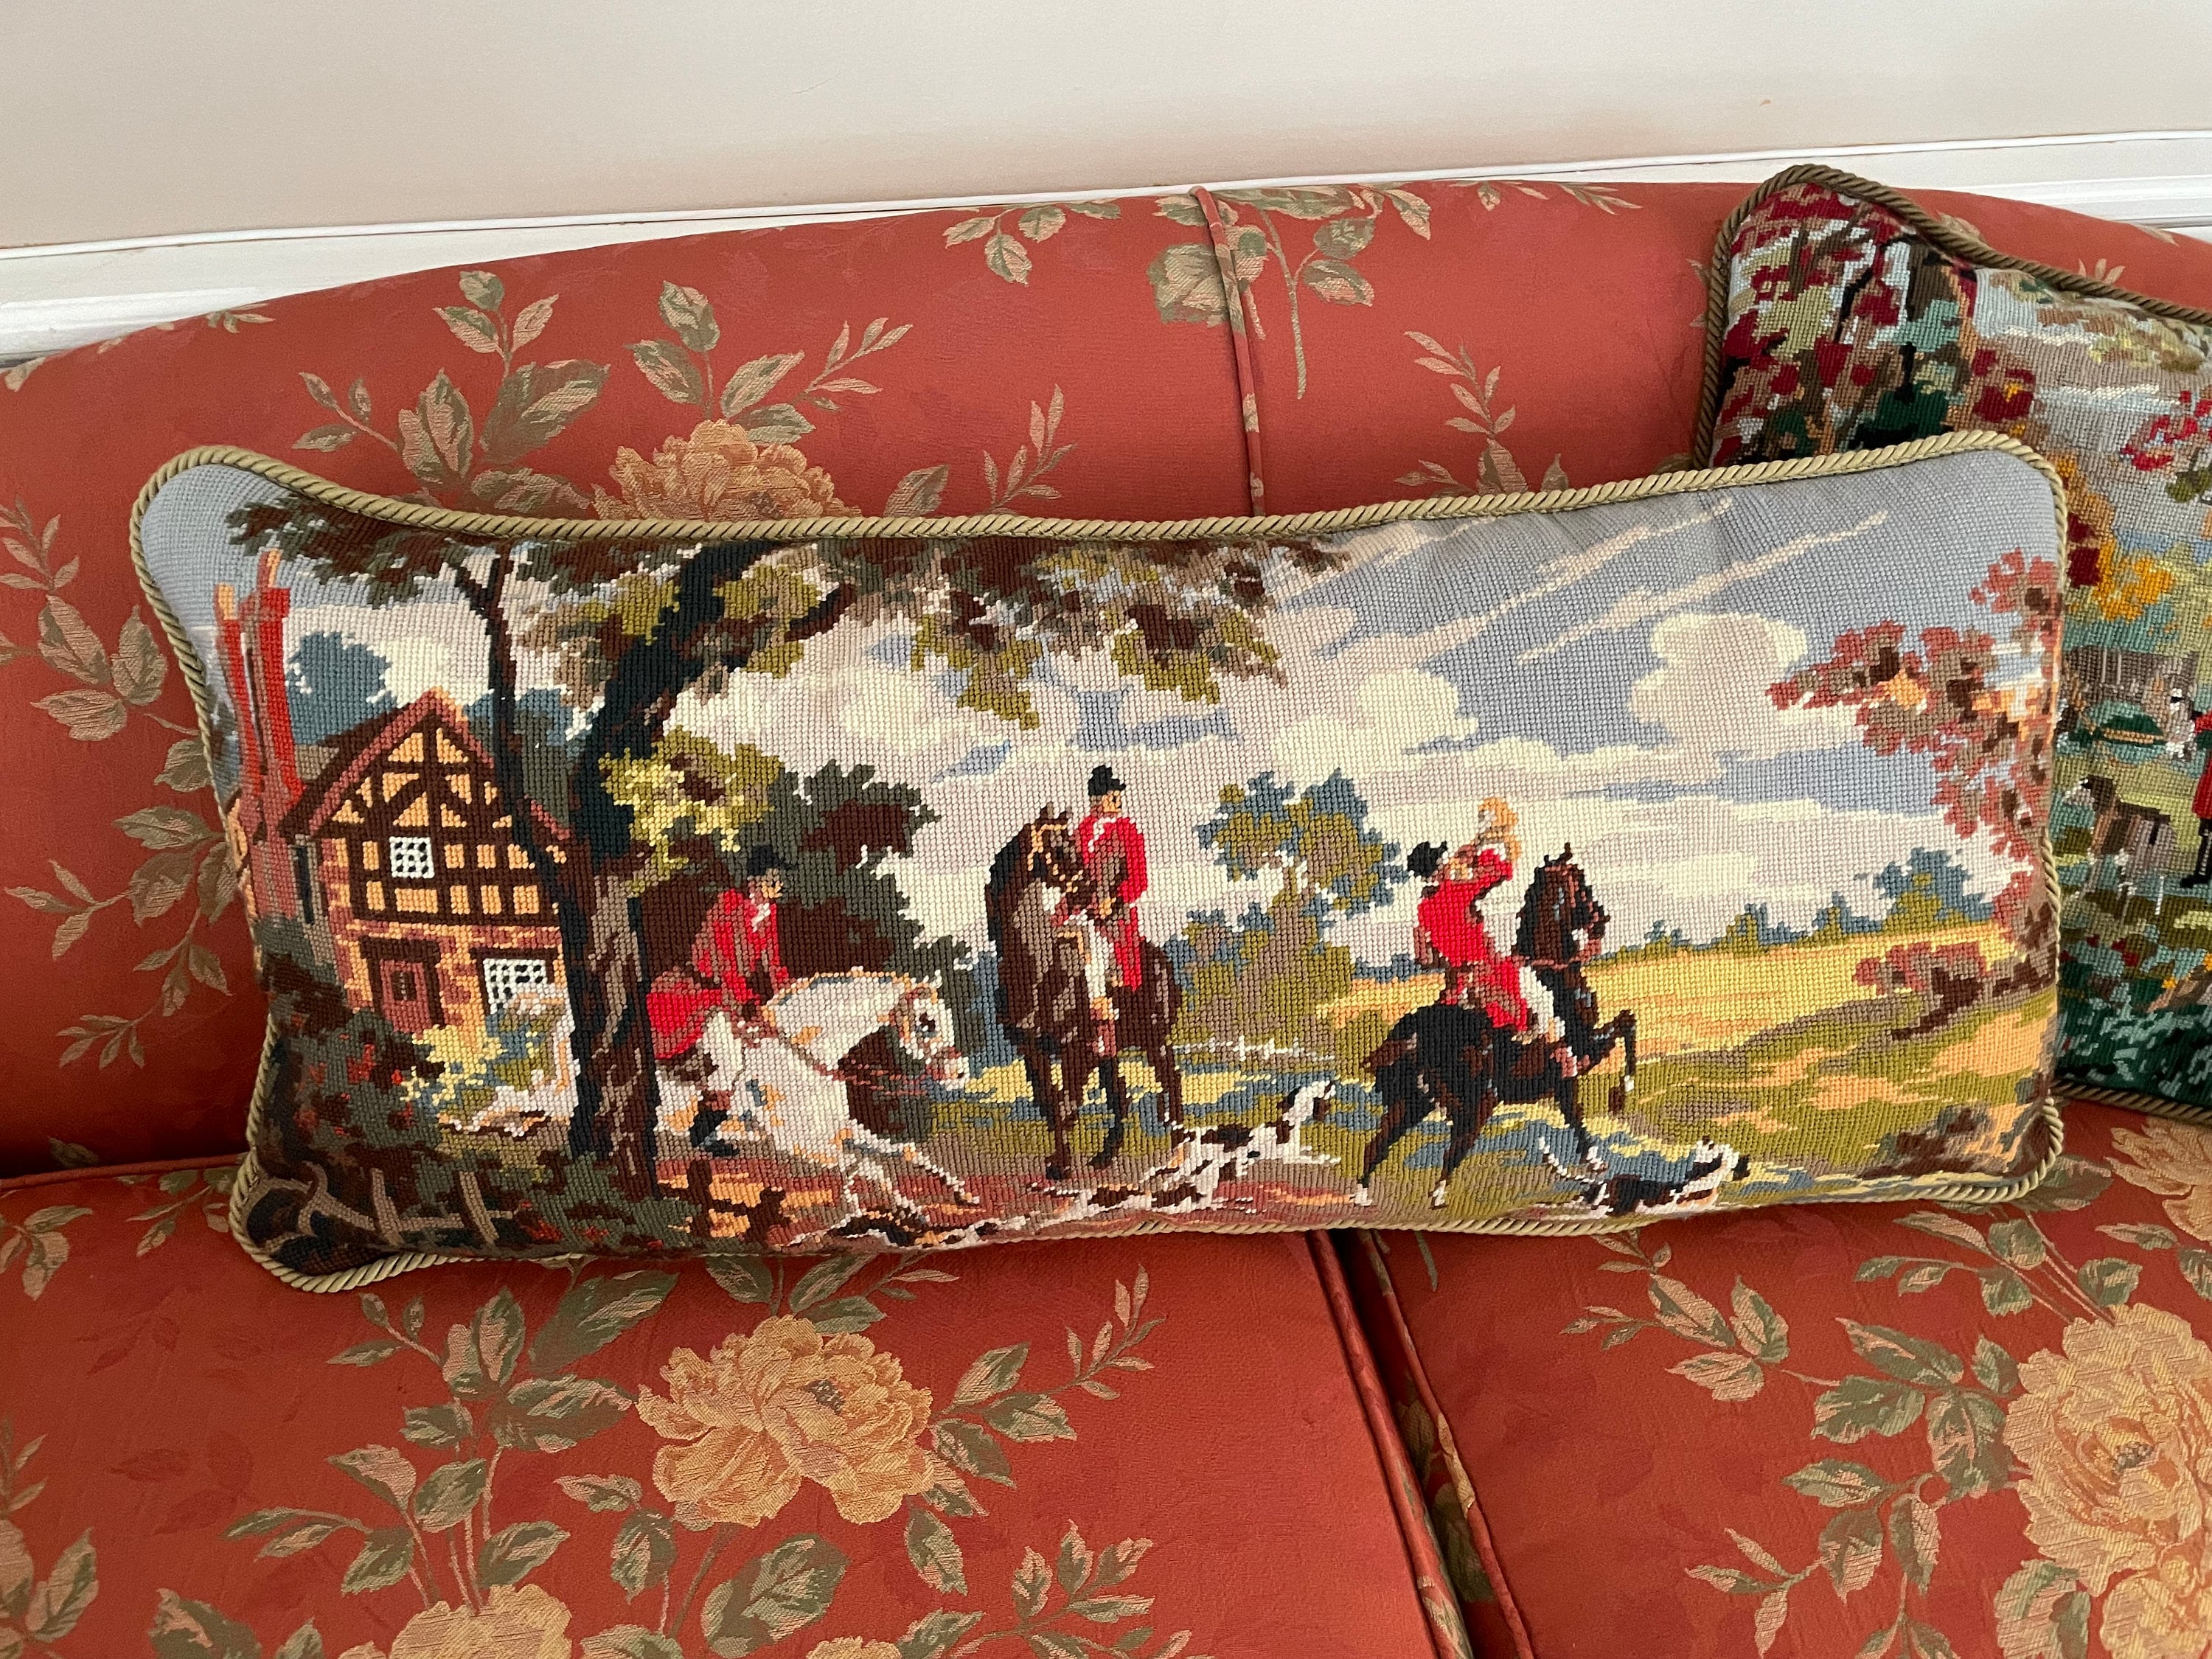 Walking the Hounds - Tapestry Foxhunting Pillow — Horse and Hound Gallery